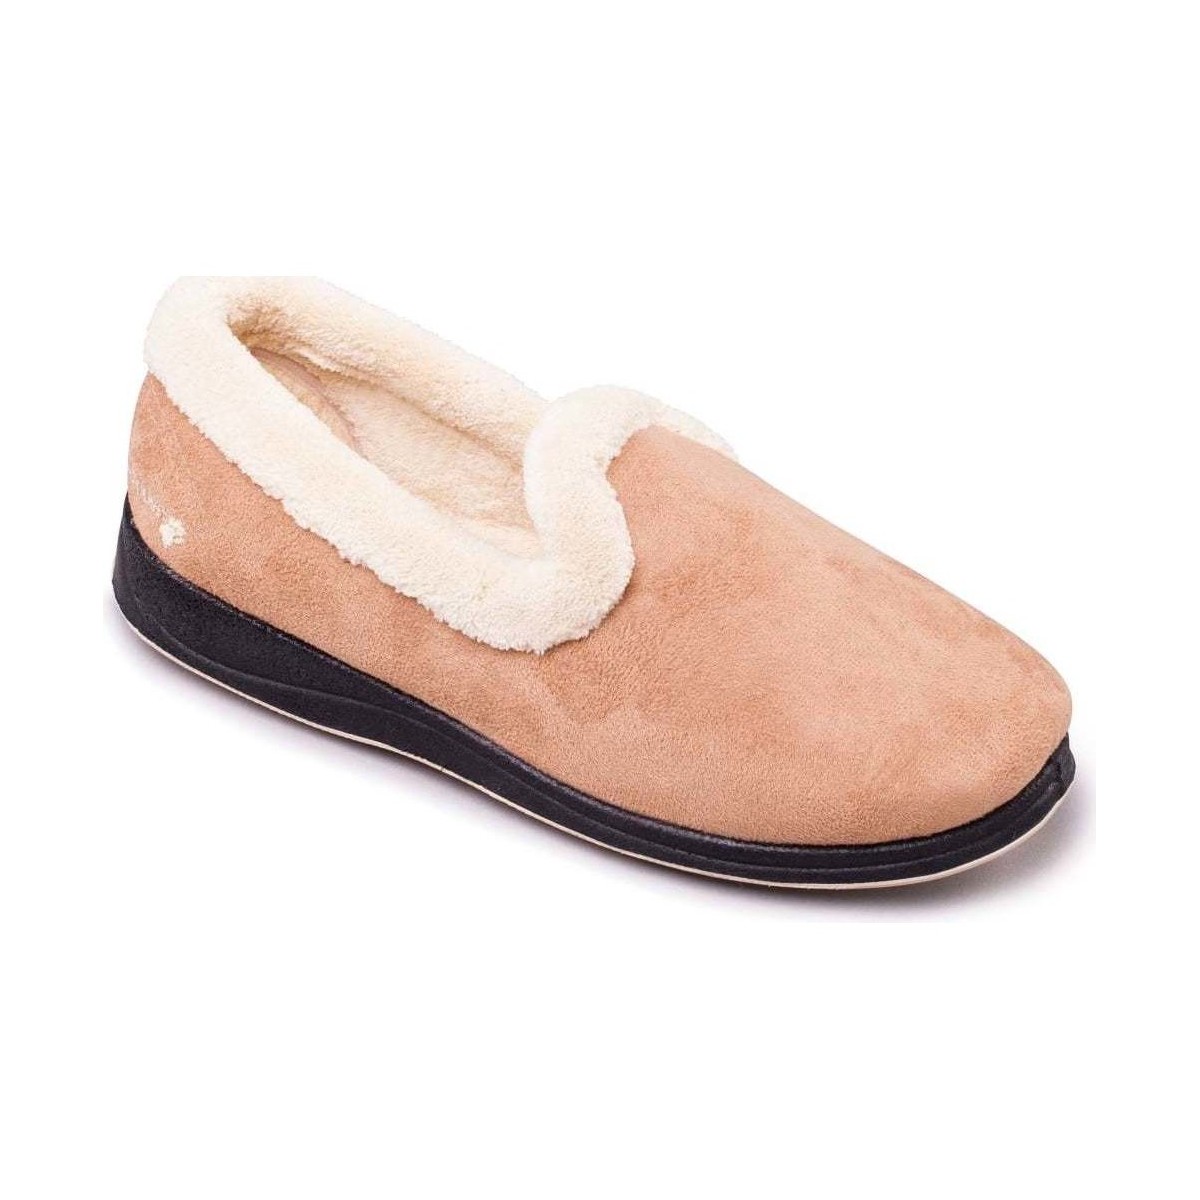 Shoes Women Slippers Padders Repose Womens Fully Lined Slippers Beige